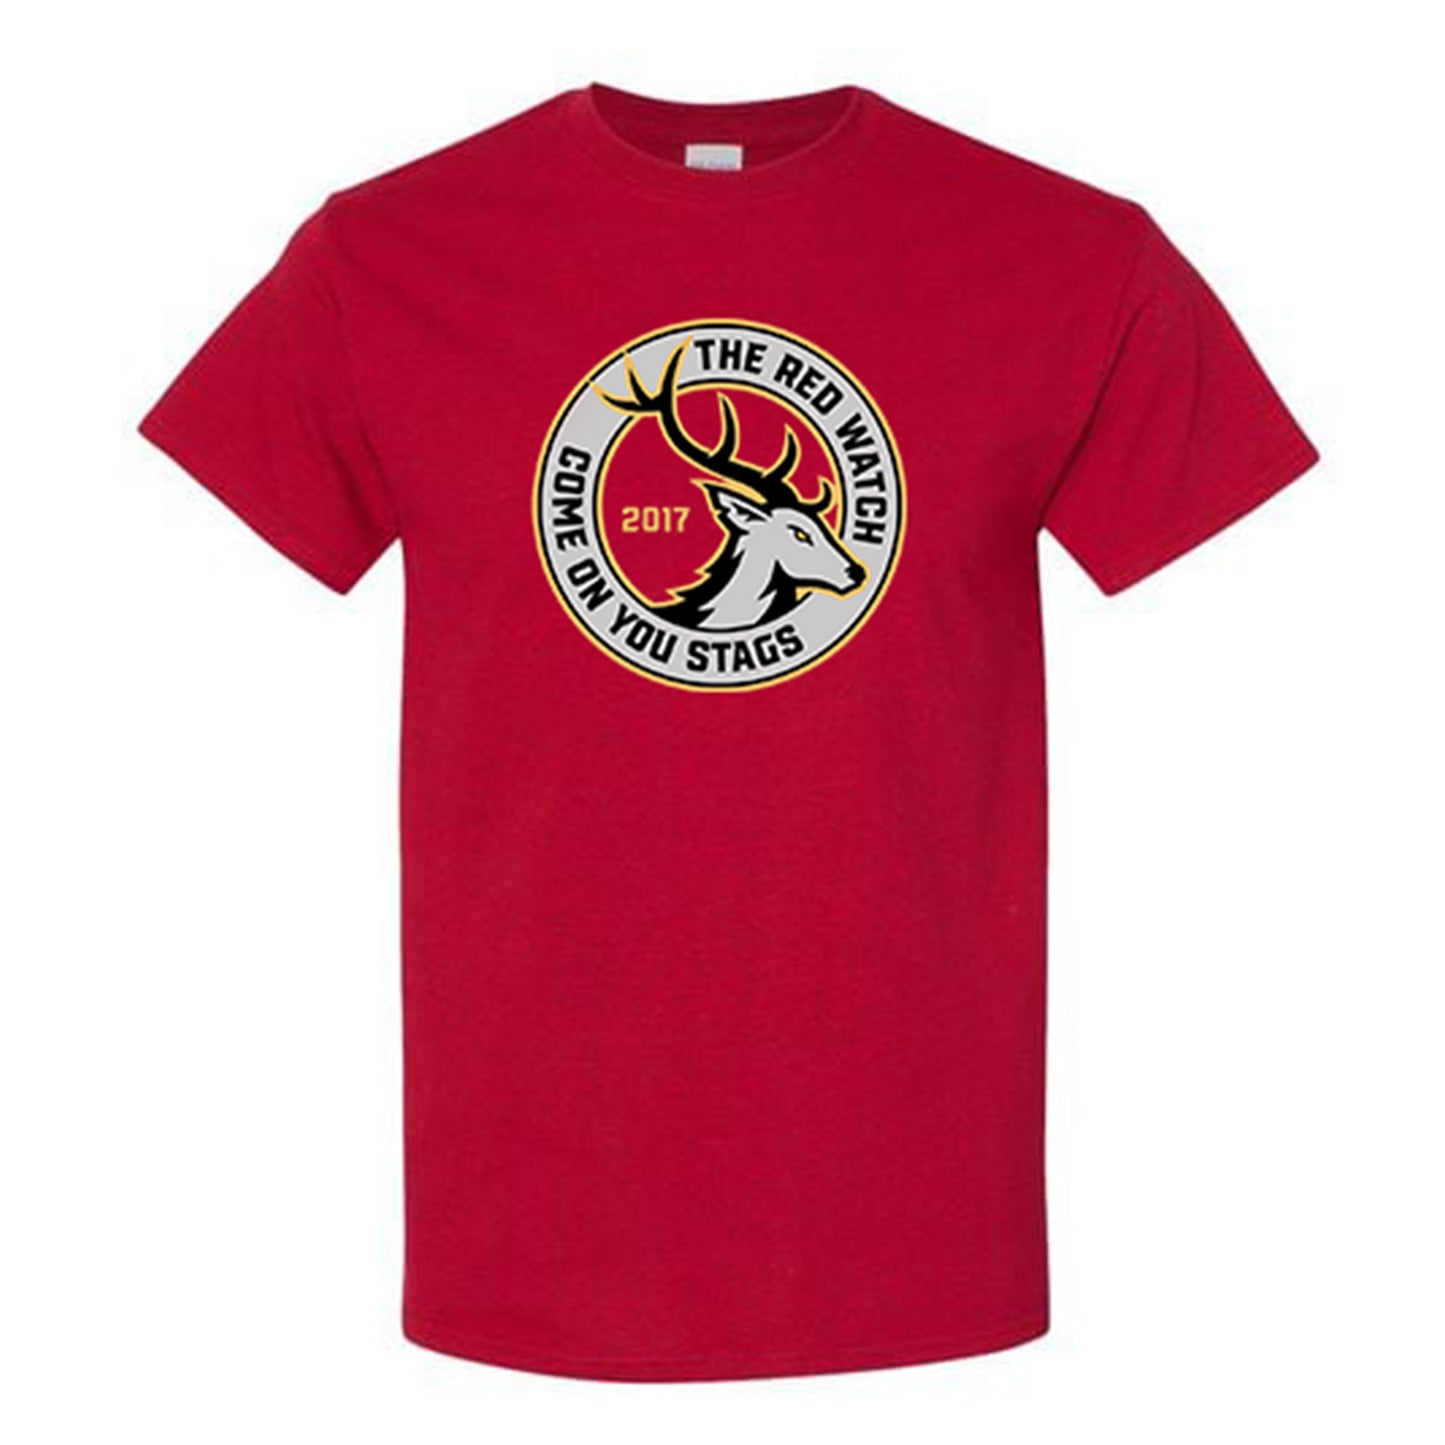 The Red Watch Logo Tee